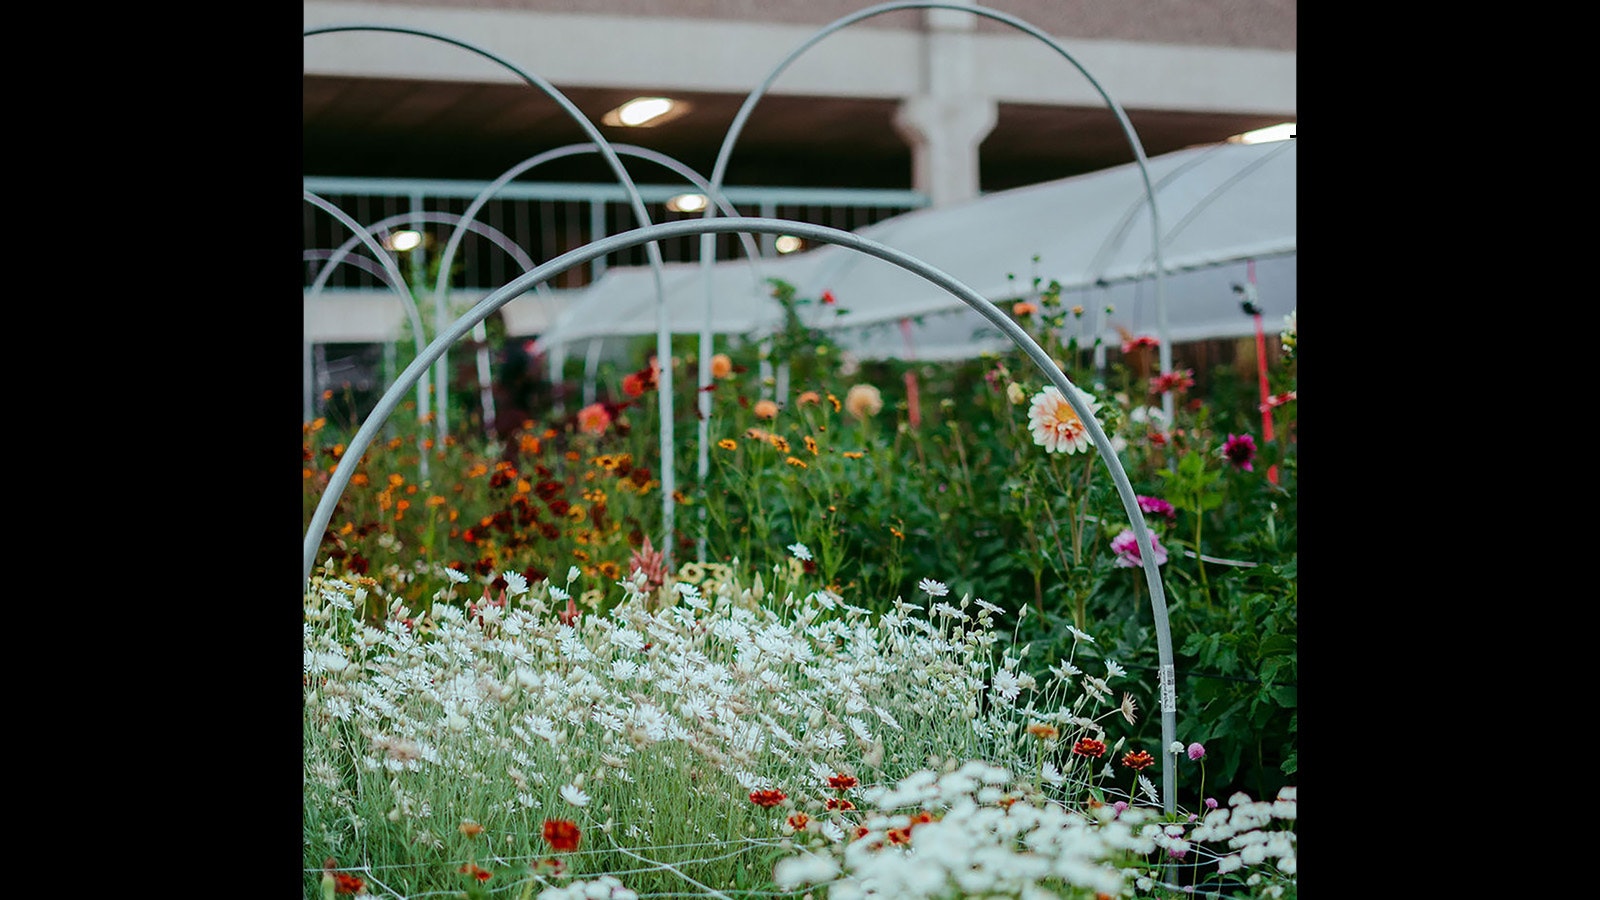 Metal hoops support plastic for low tunnels that protect the flowers from snowstorms while the fencing helps ensure plants stay upright and arent shredded by wind.